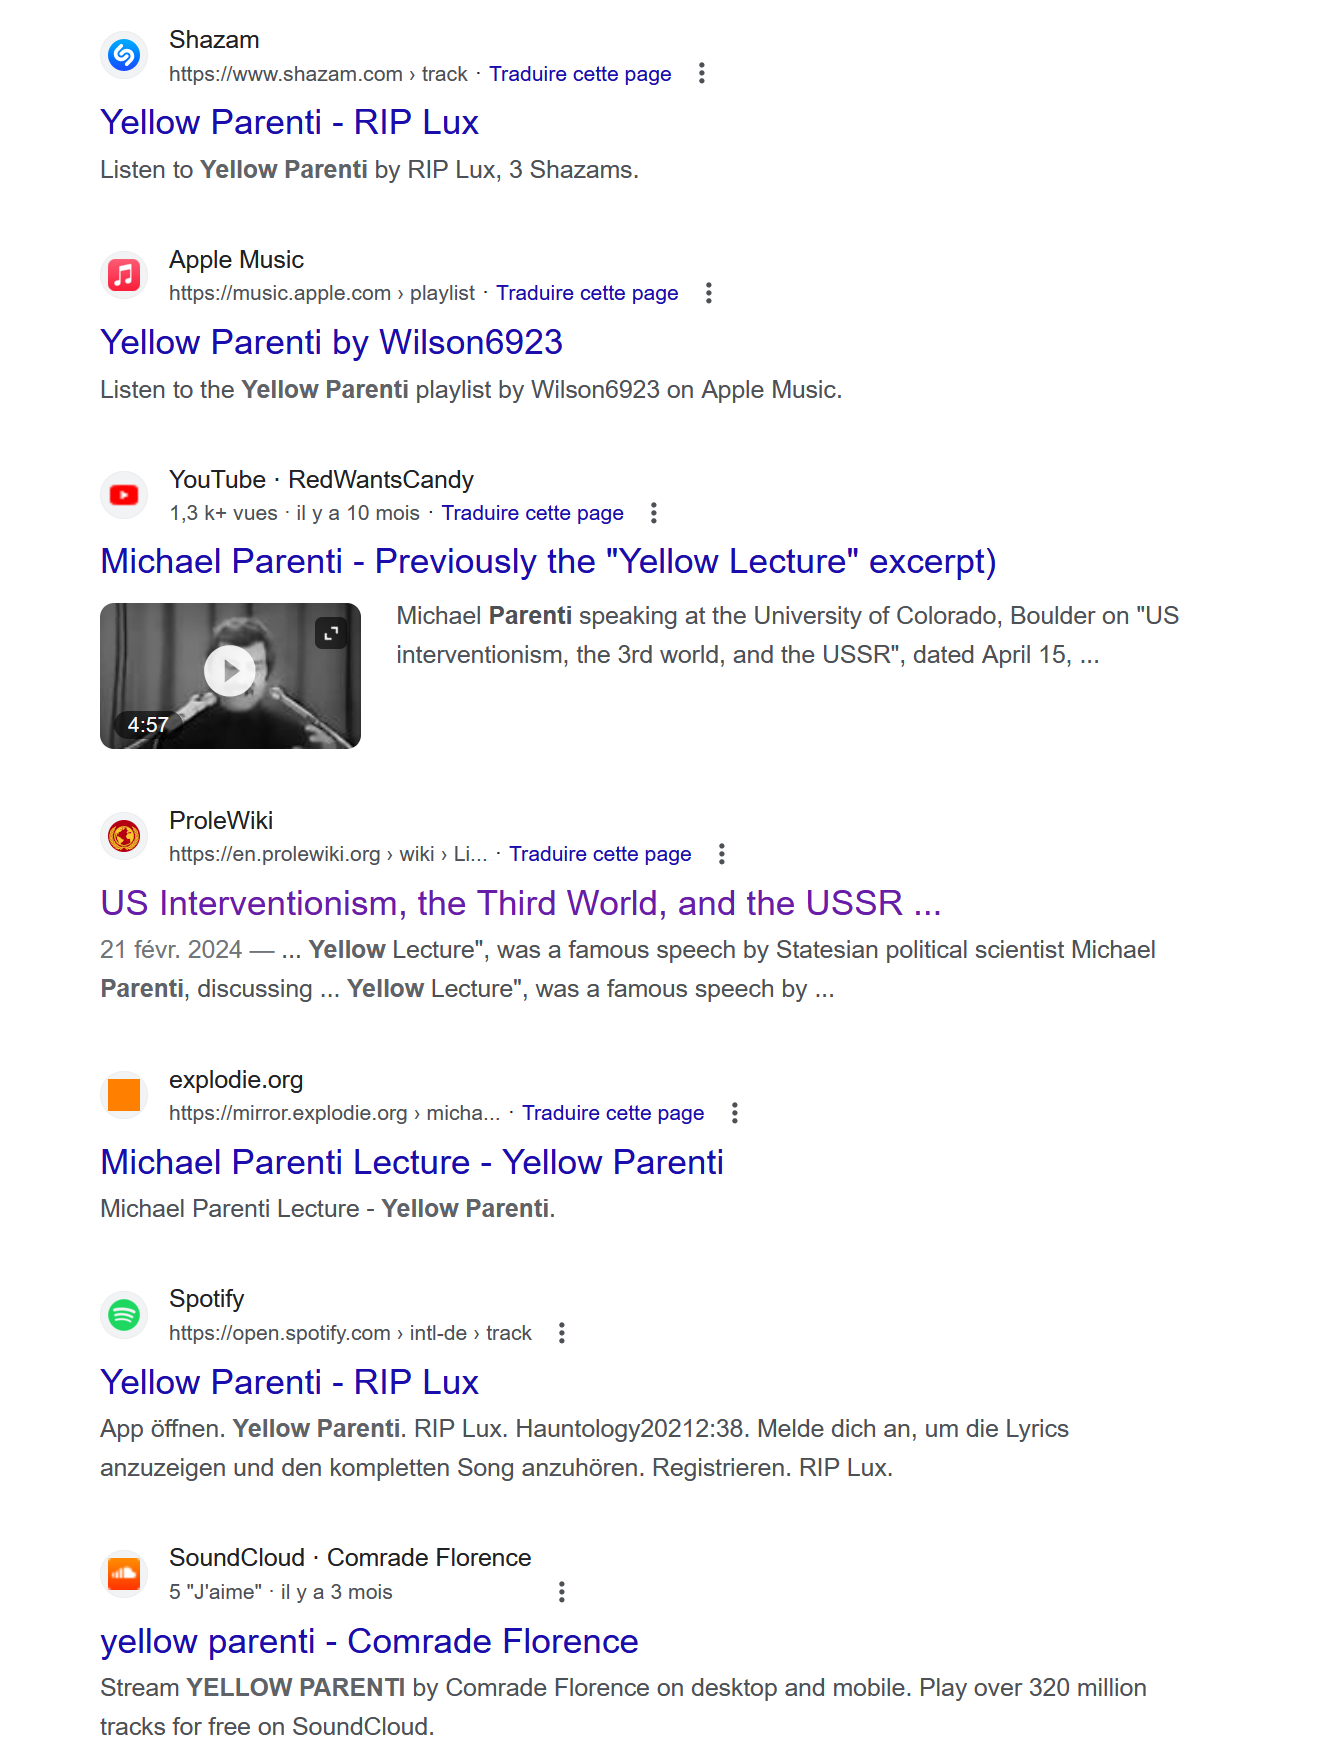 Thumbnail for File:Google results for keyword "yellow parenti".png